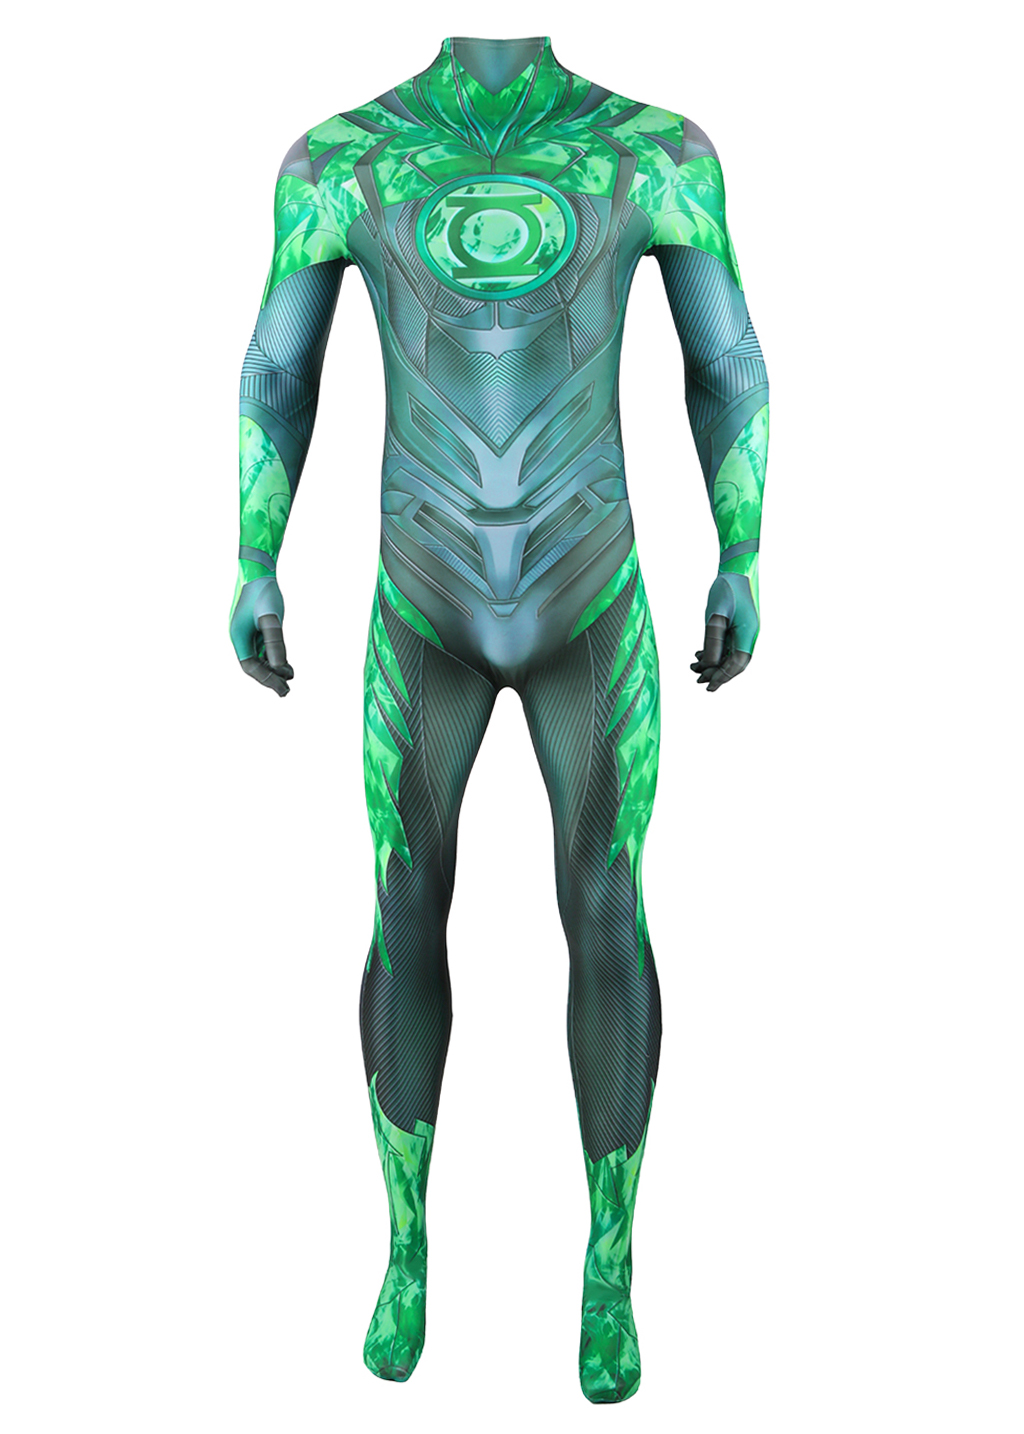 Green Lantern Costume Suicide Squad Kill the Justice League Bodysuit Cosplay for Adult Kids